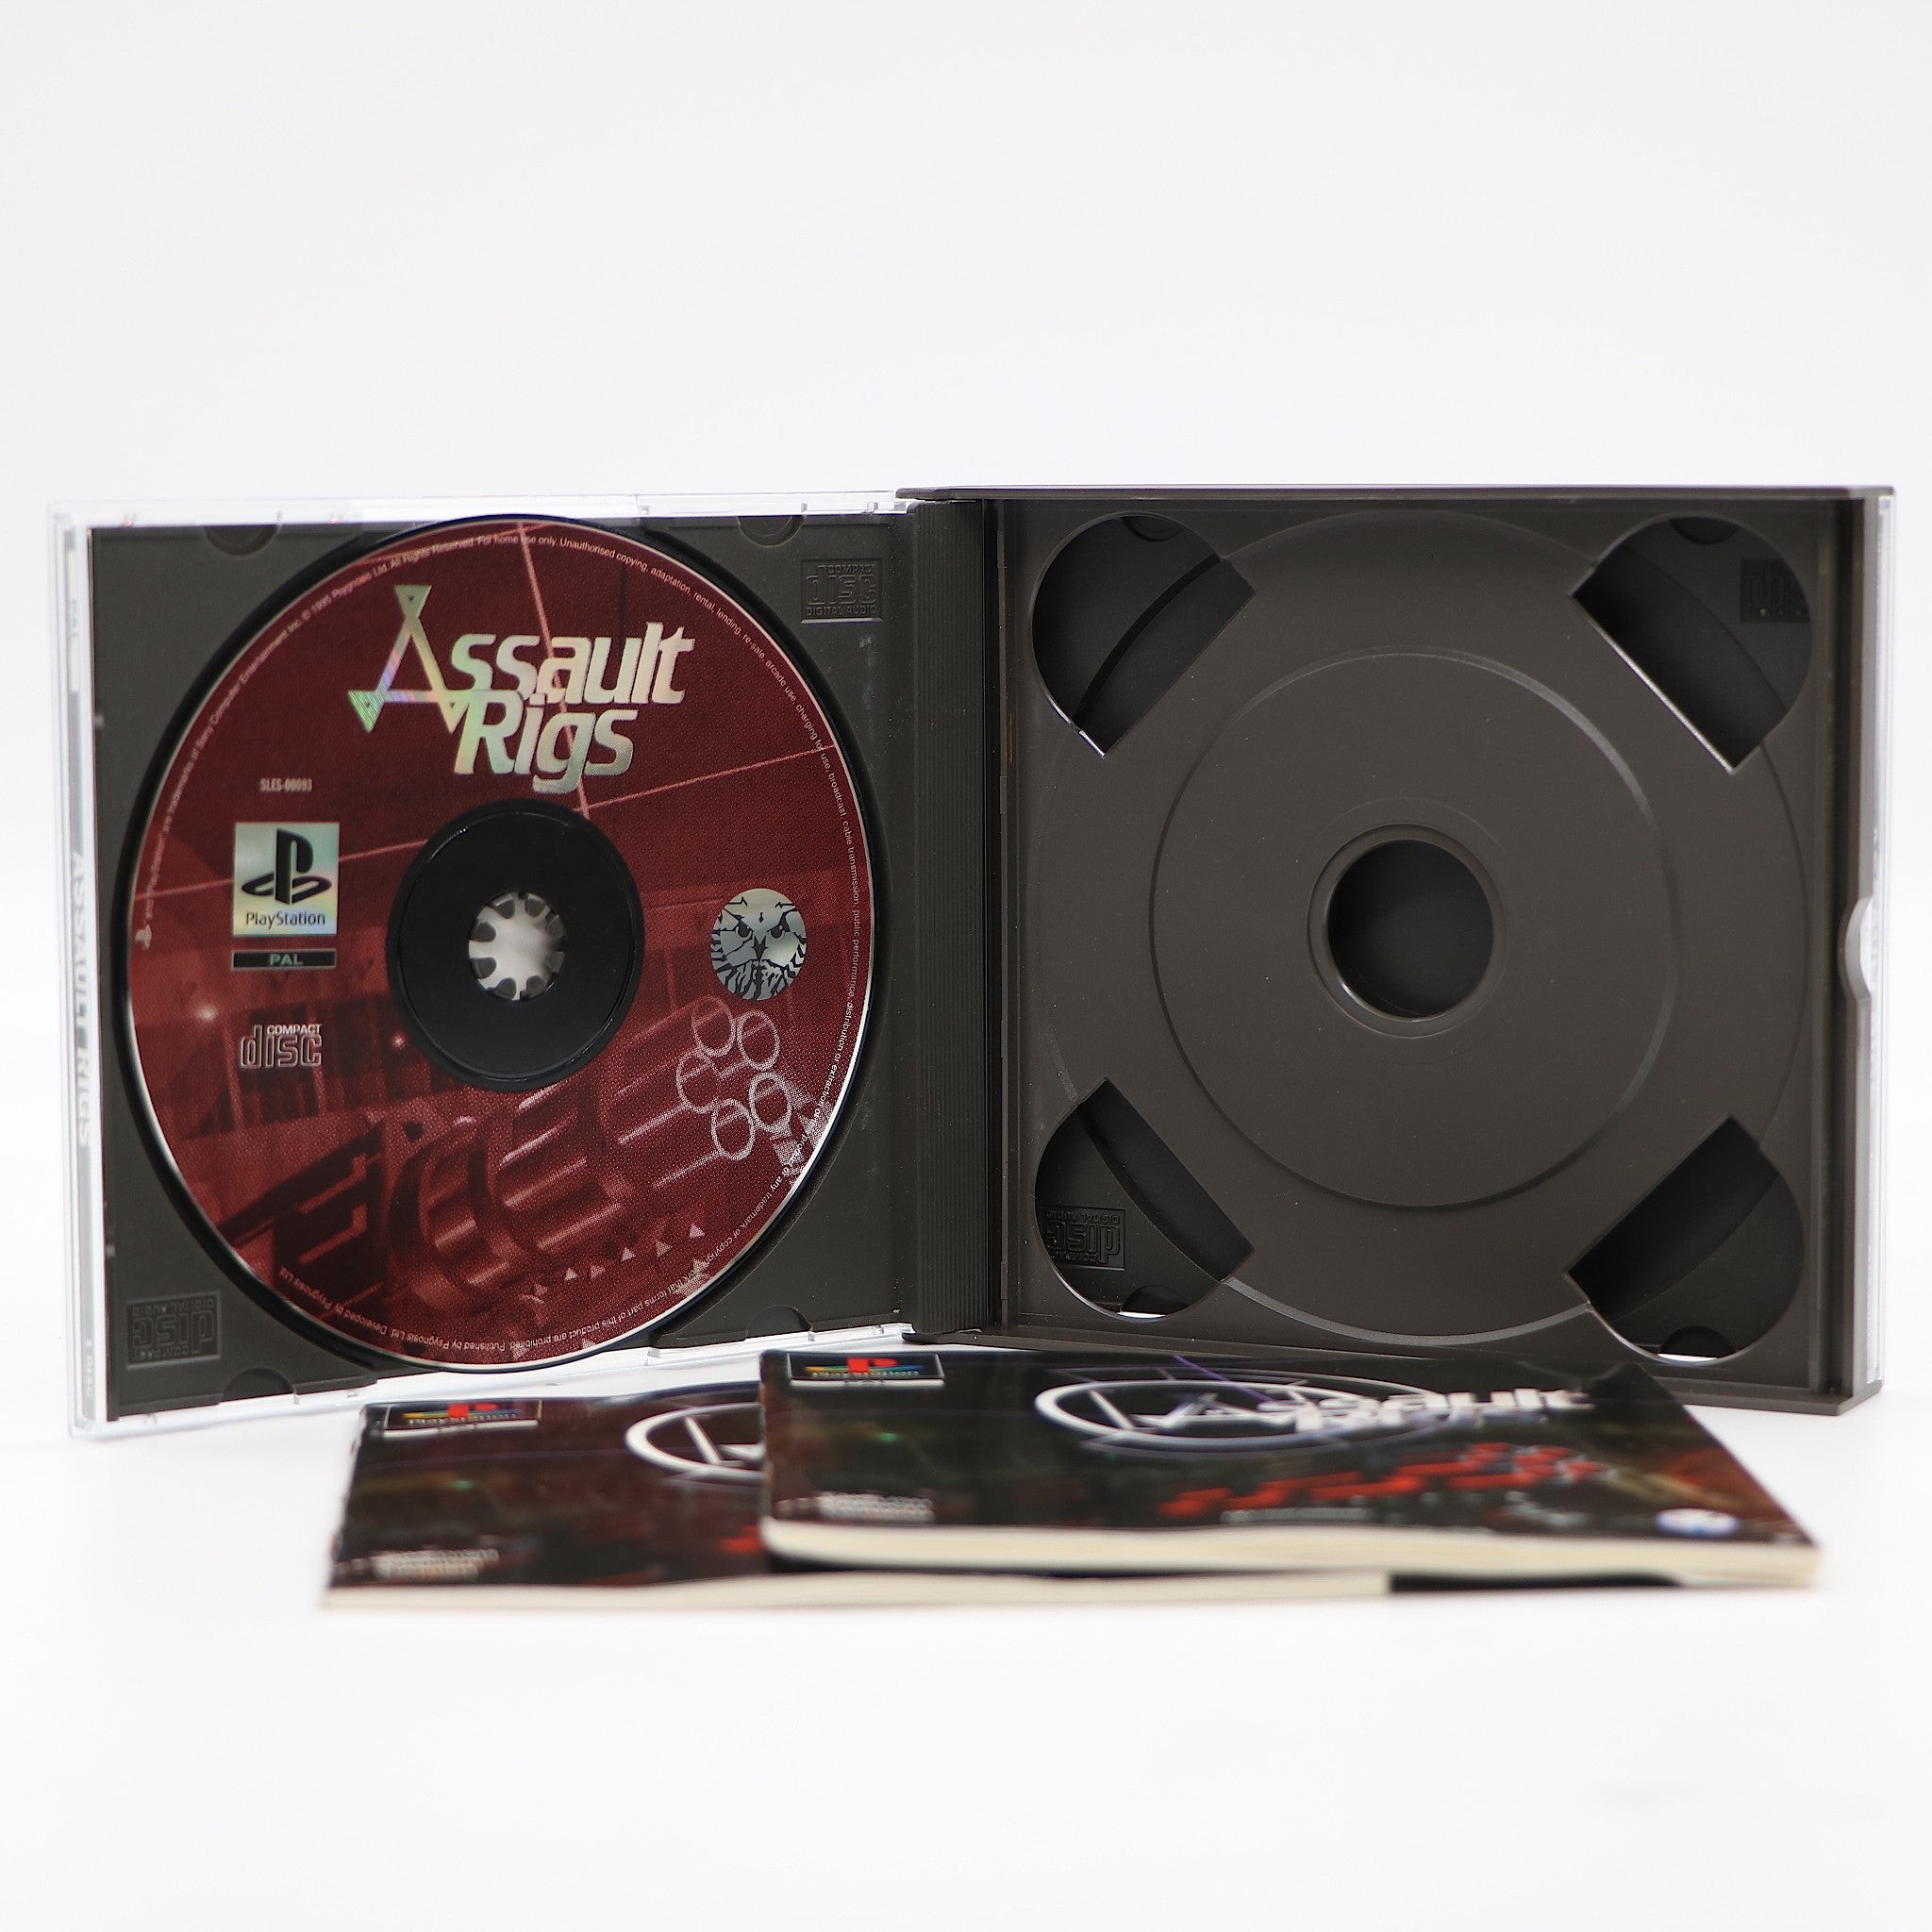 Assault Rigs | Big Box | Sony Playstation PS1 Game | Collectable Condition